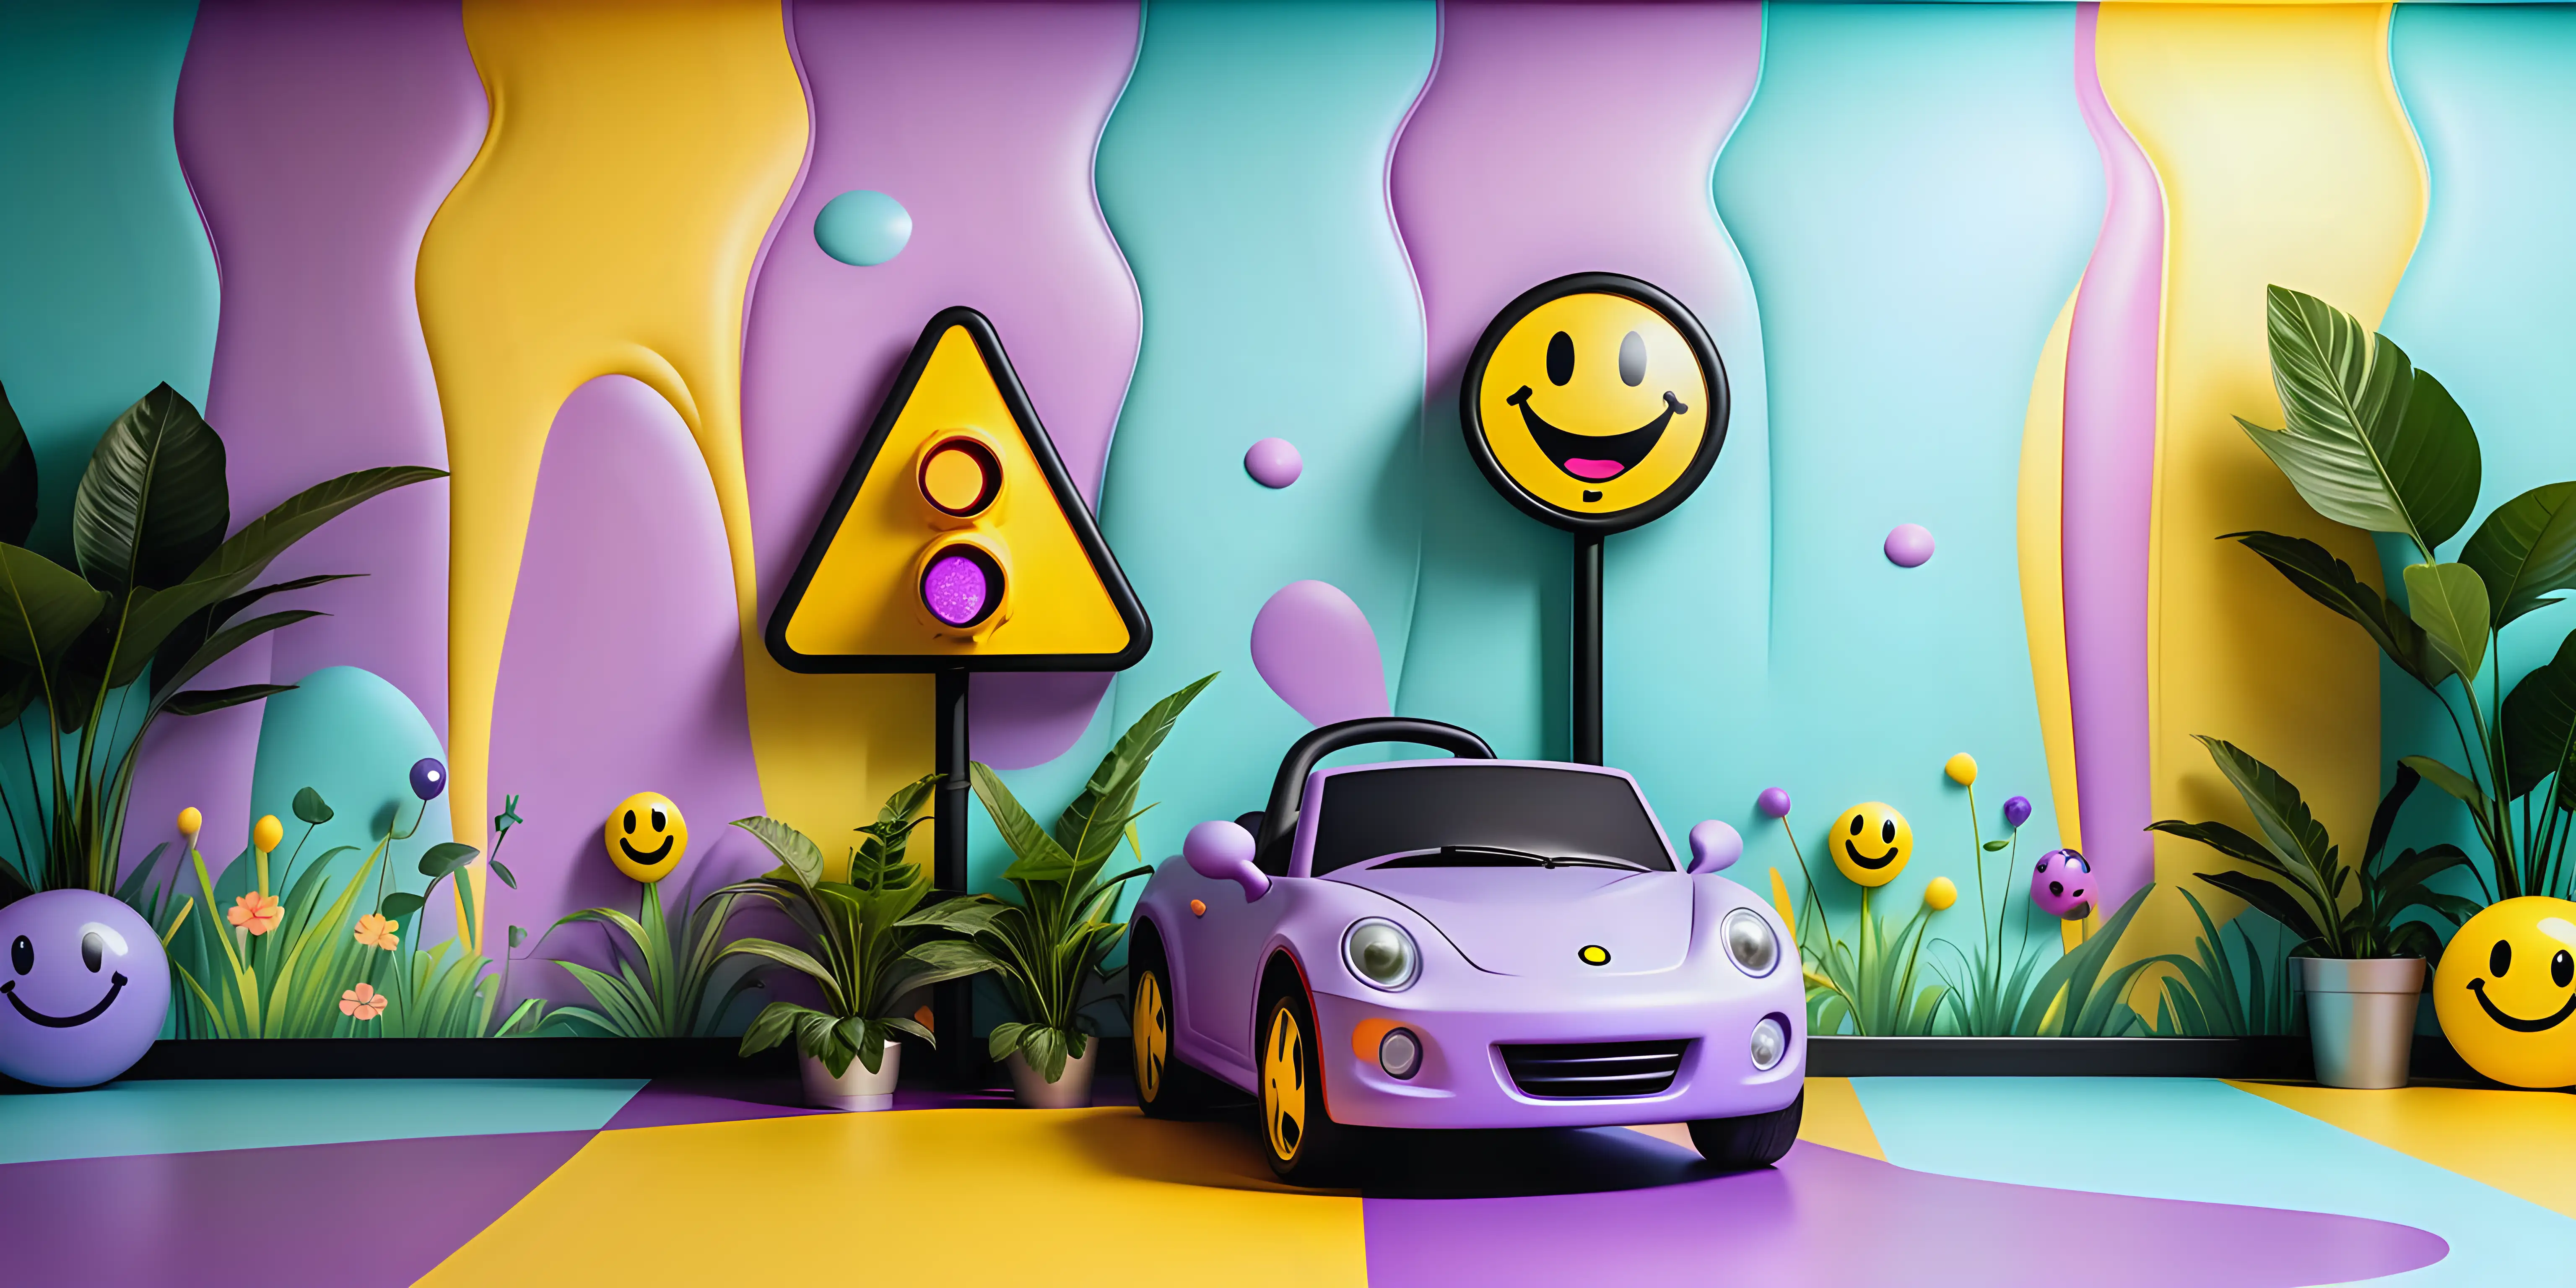 A wall paper texture for kids and soft play area that looks funny and give fun vibe and joy mood with car and metled  traffic signal with plants and  smiley faces and cartoon kids with light colors of  aqua and yellow and lilac purple and pink